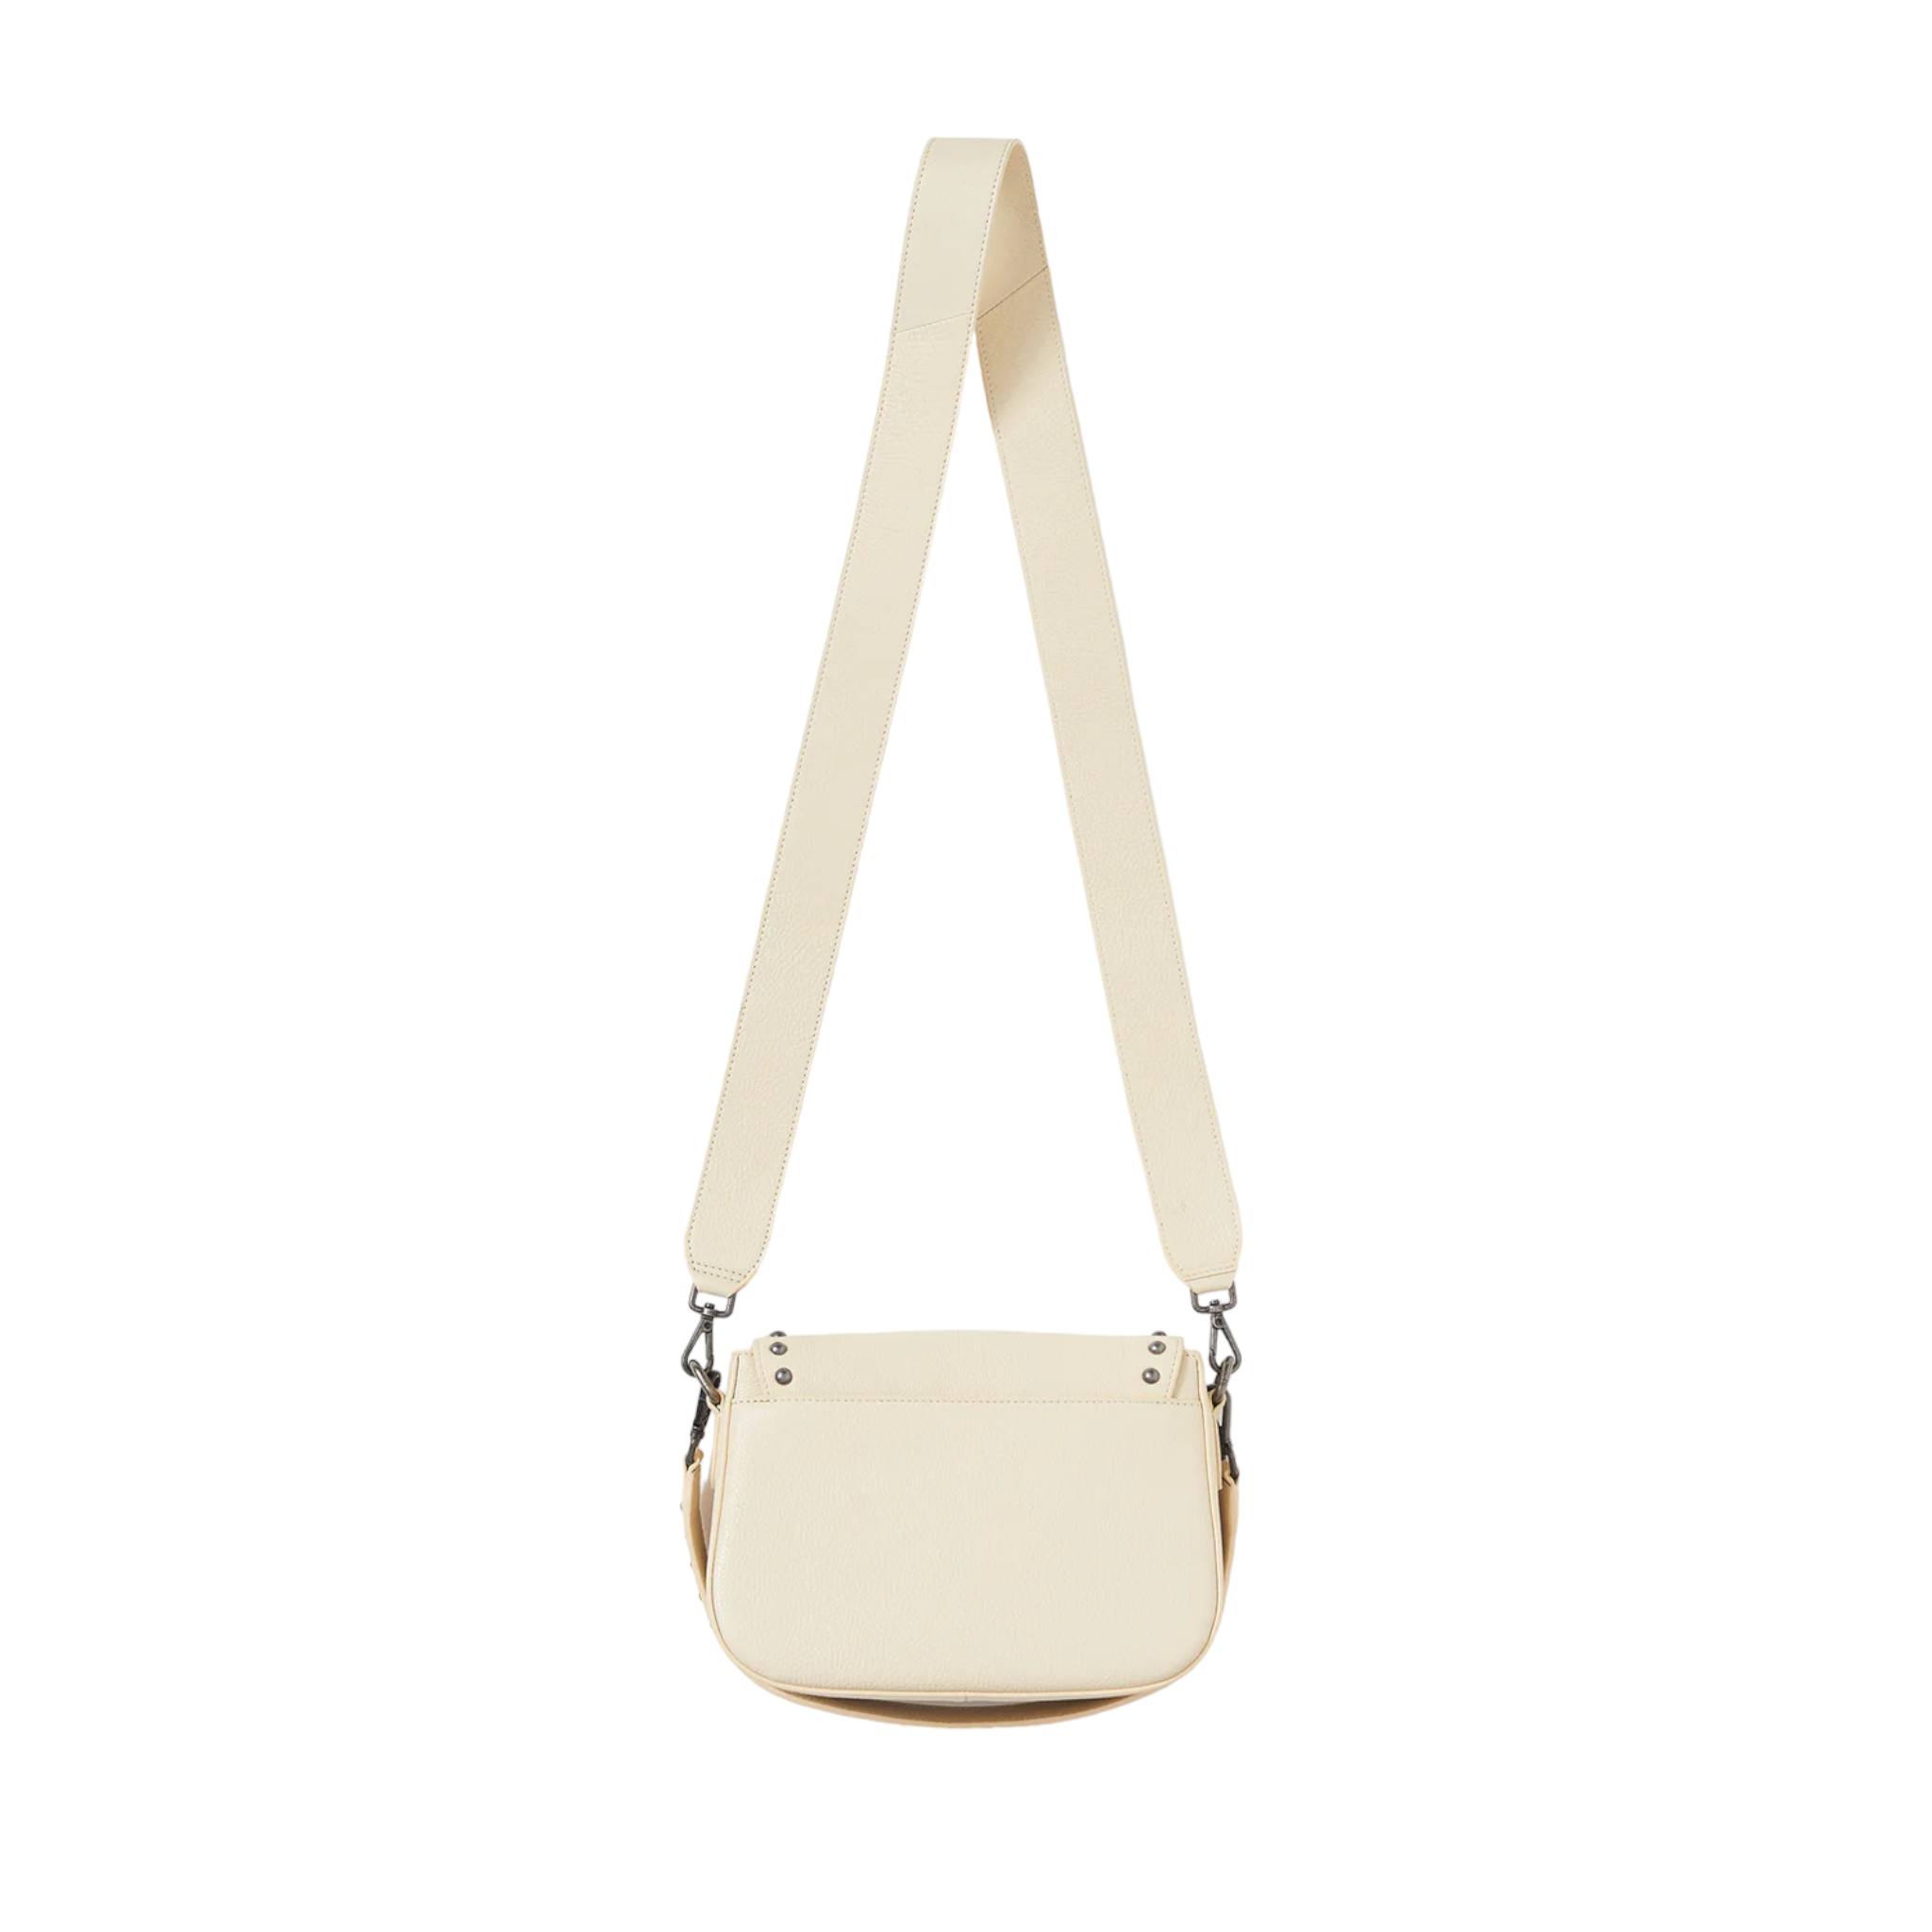 Shop Briarwood Quillie - with shoe&amp;me - from Briarwood - Bags - Handbag, Summer, Womens - [collection]